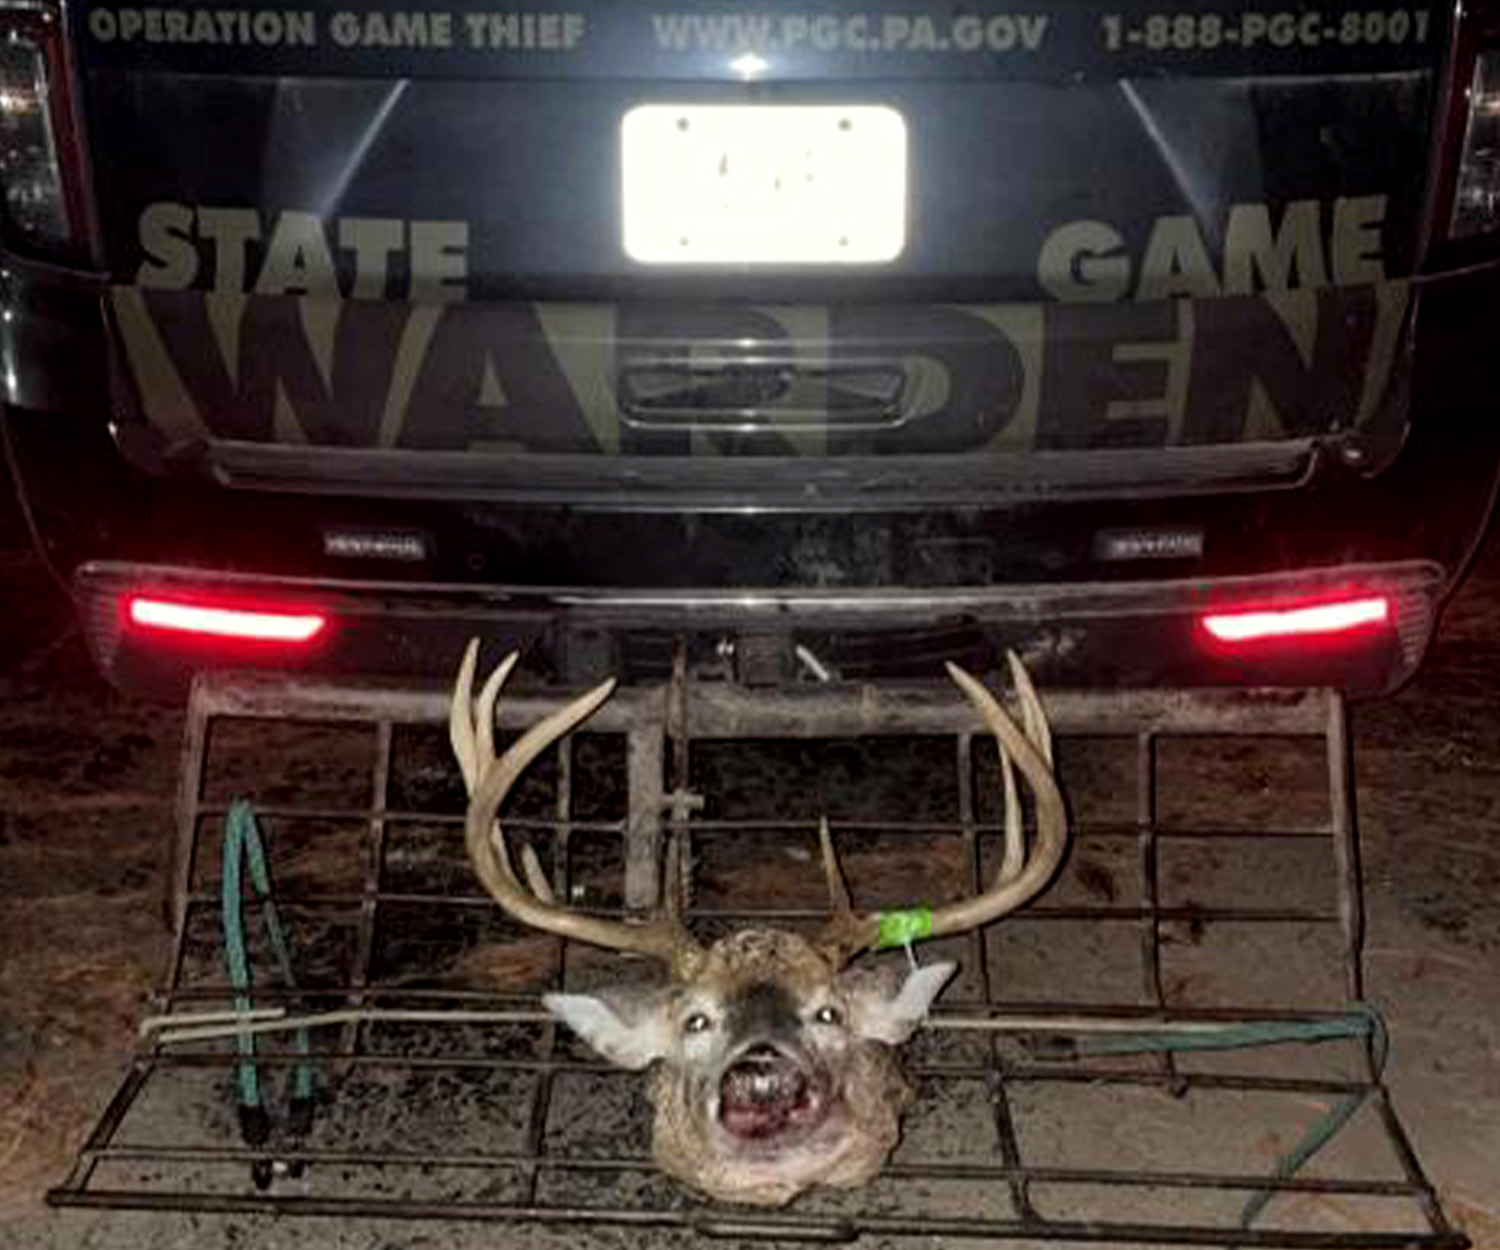 The head of a trophy buck that was killed illegally and confiscated by Pennsylvania game wardens.